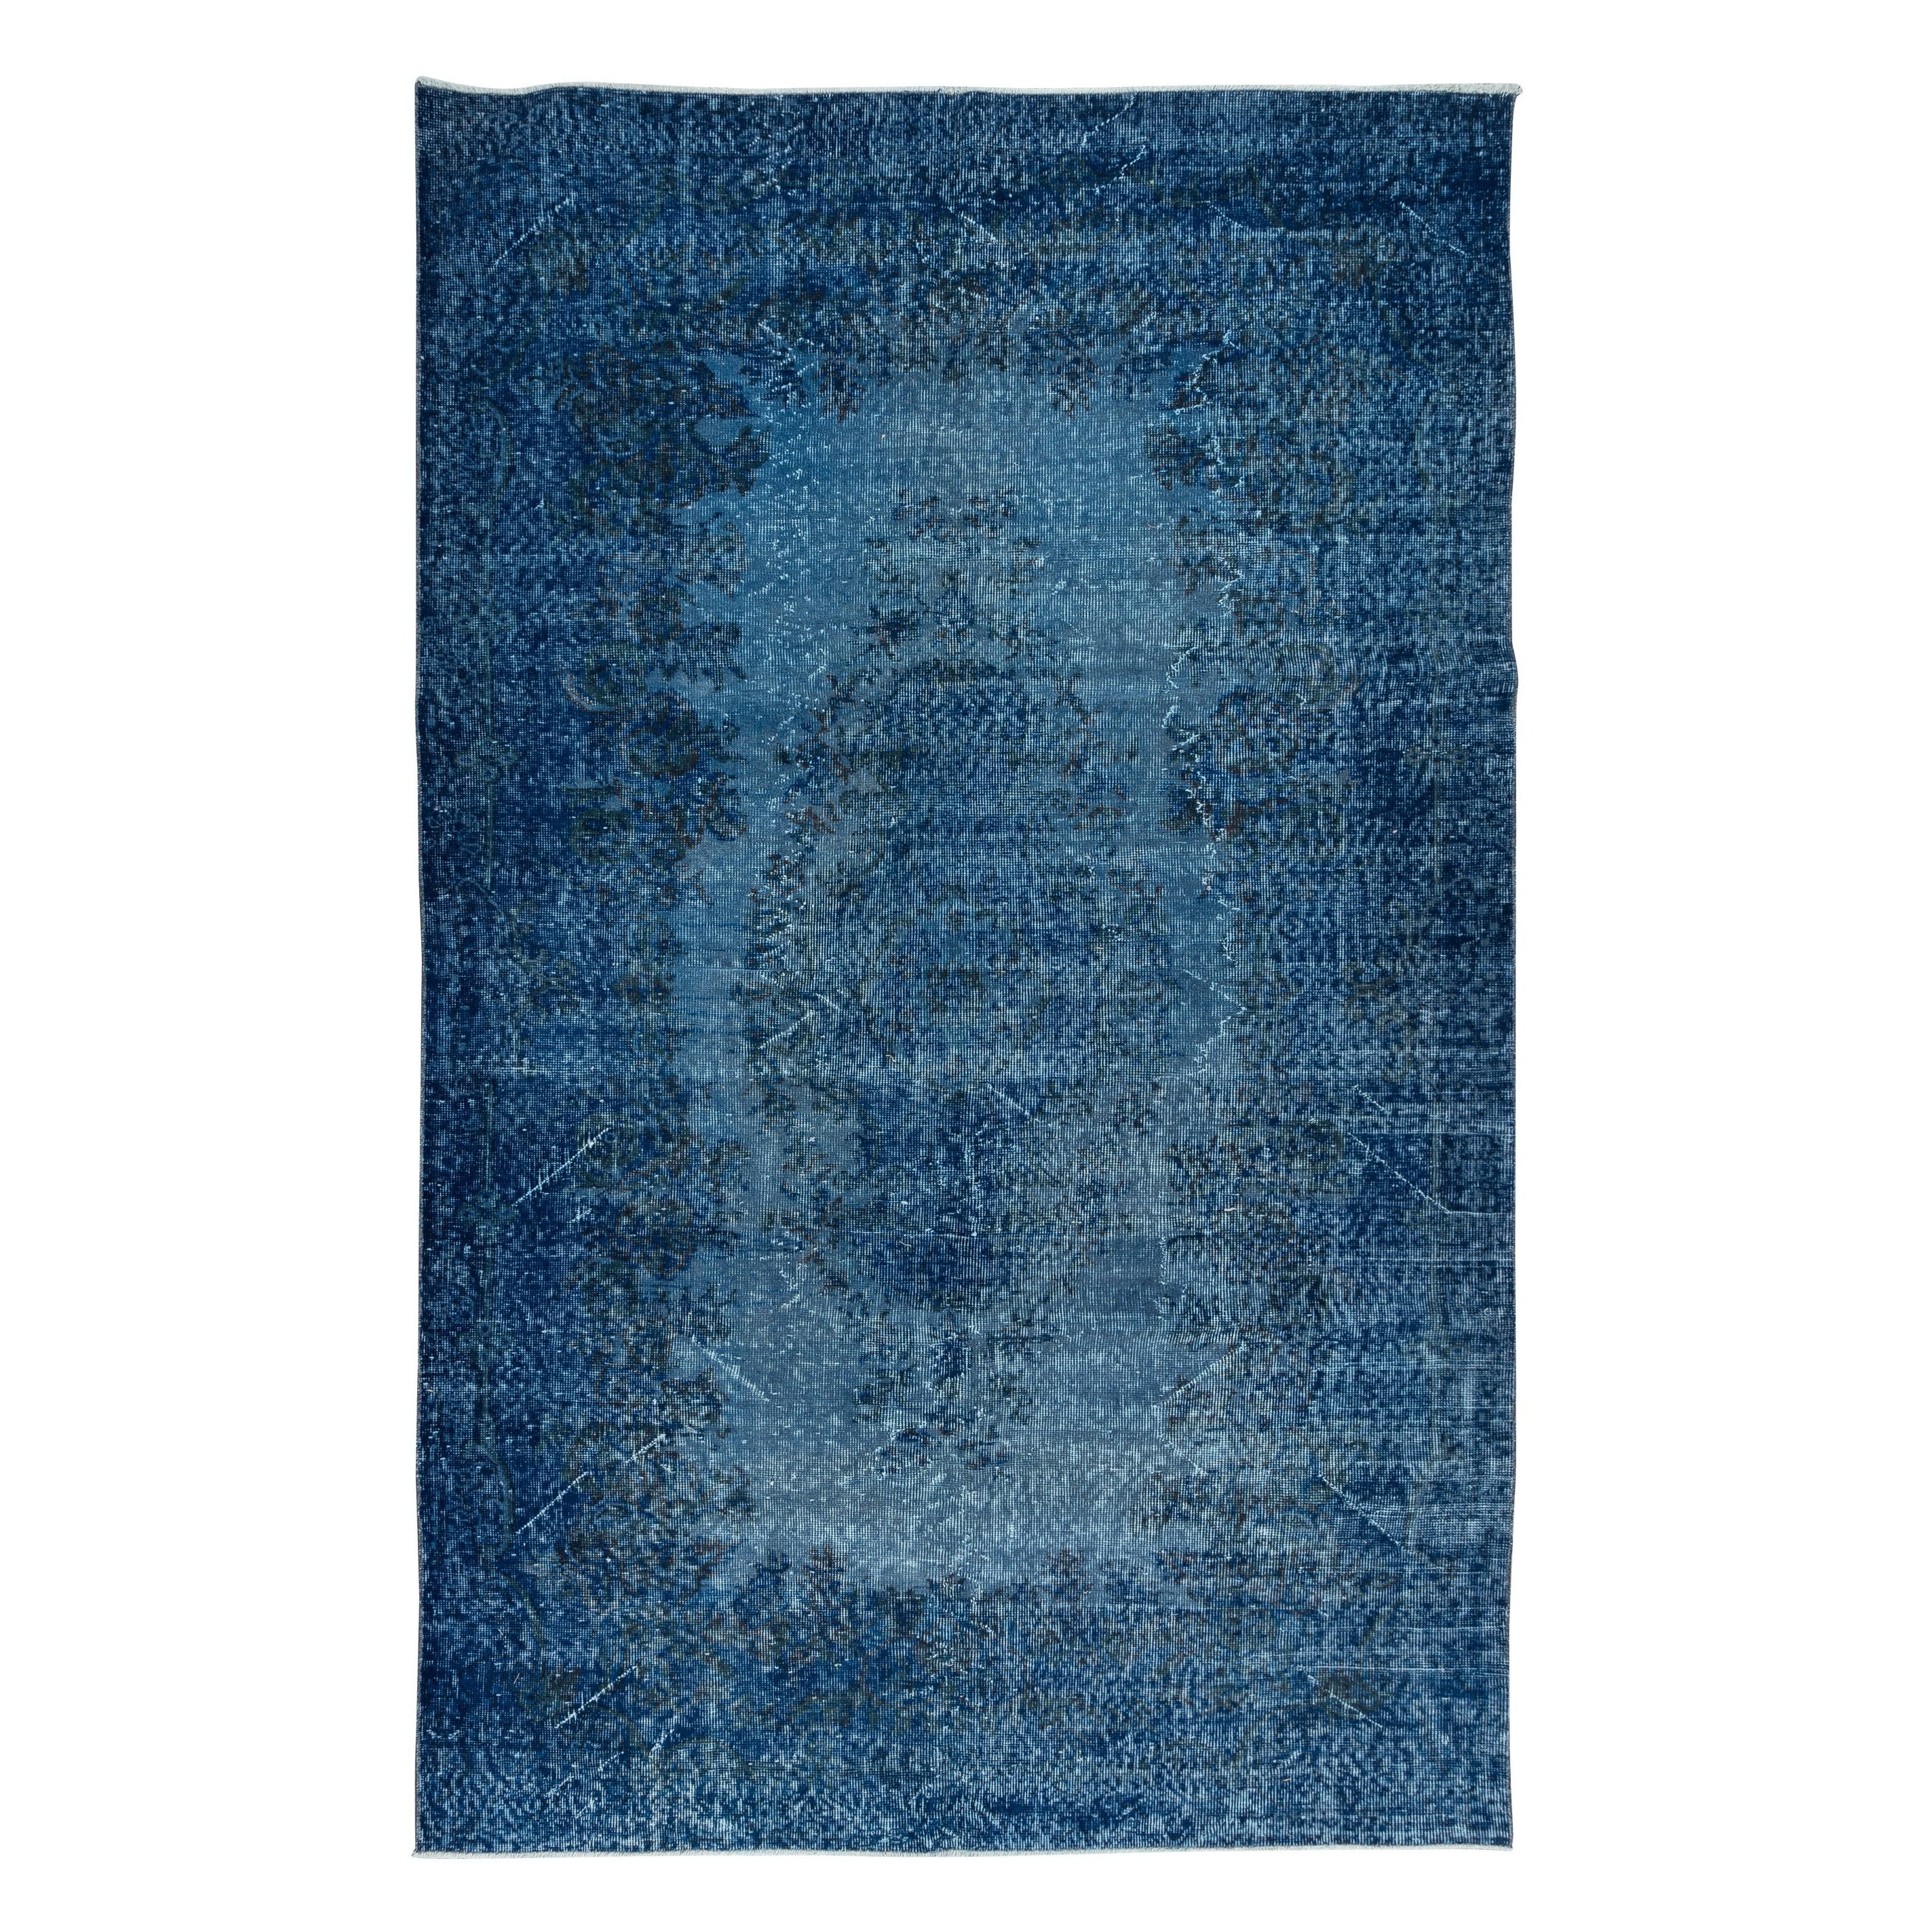 5.8x9.4 Ft Hand-knotted Turkish Upcycled Rug in Blue for Contemporary Interiors